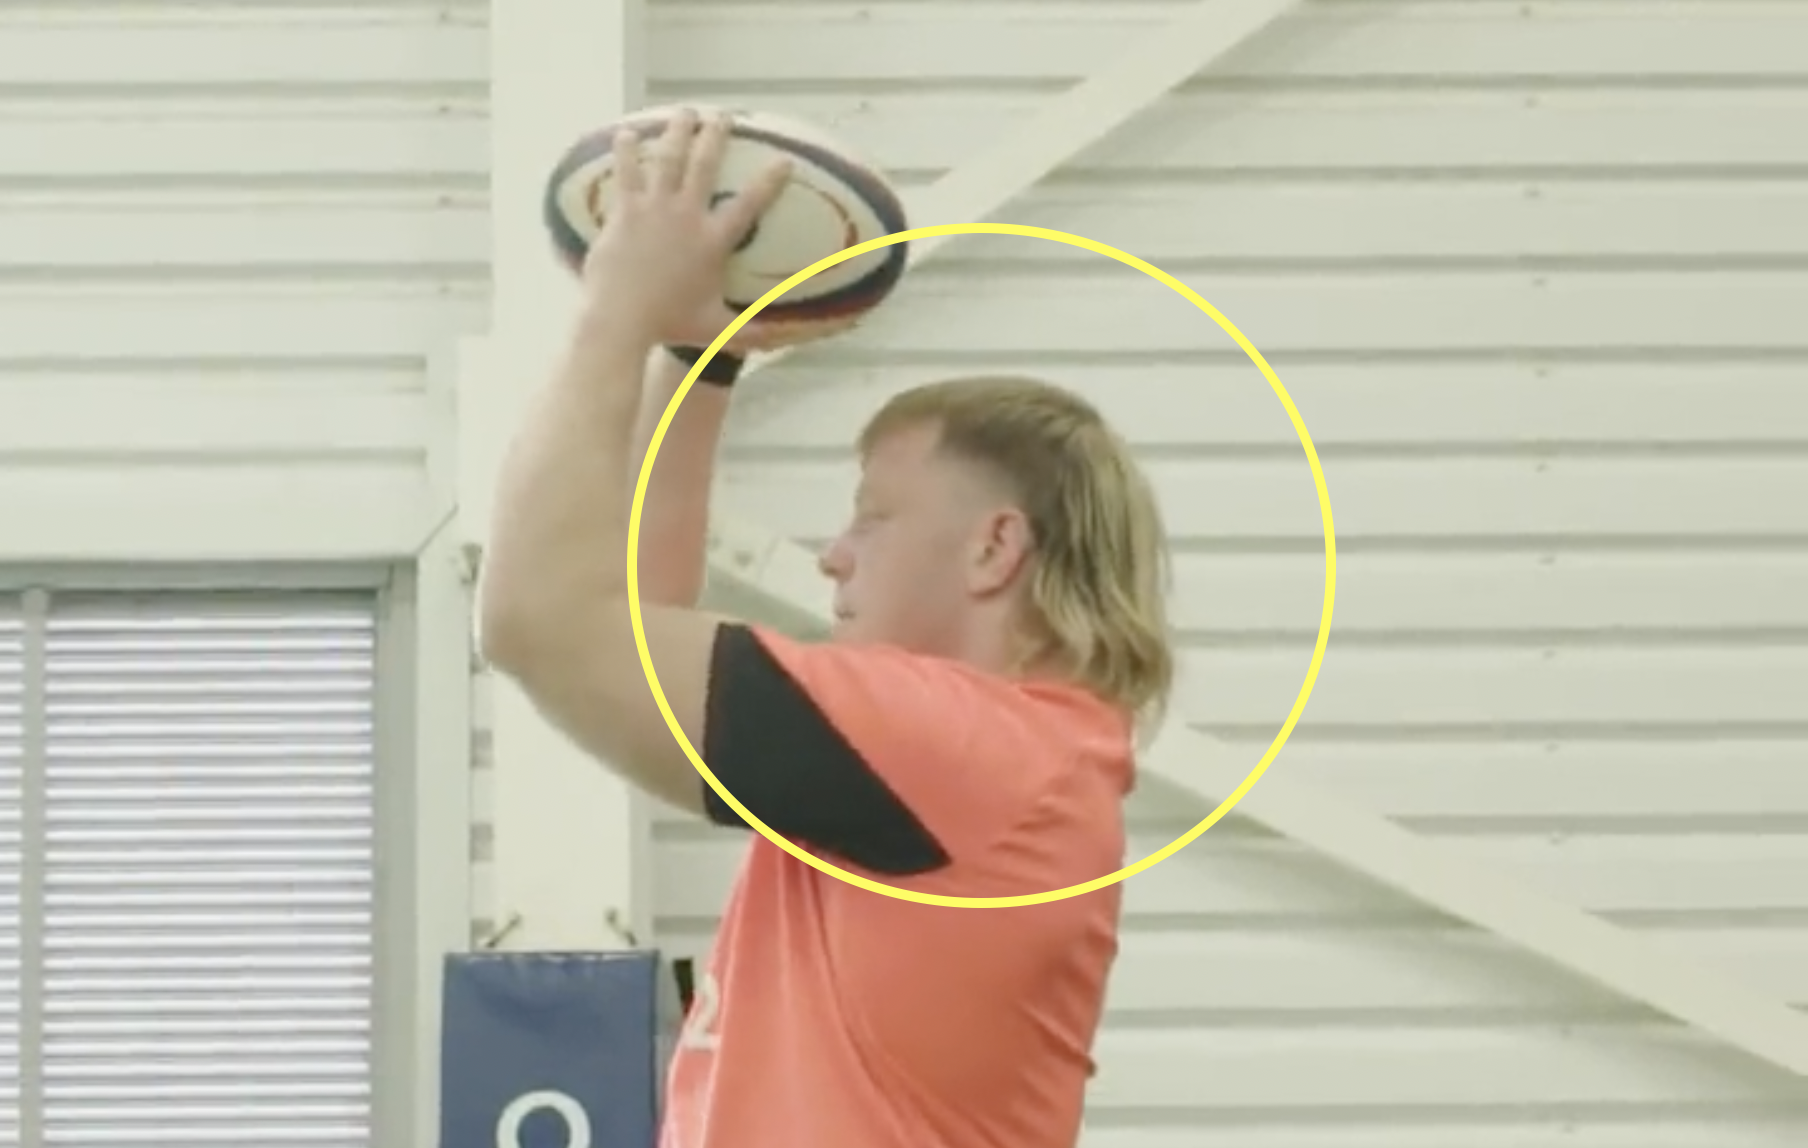 England's 'Human Mullet' shares his secrets